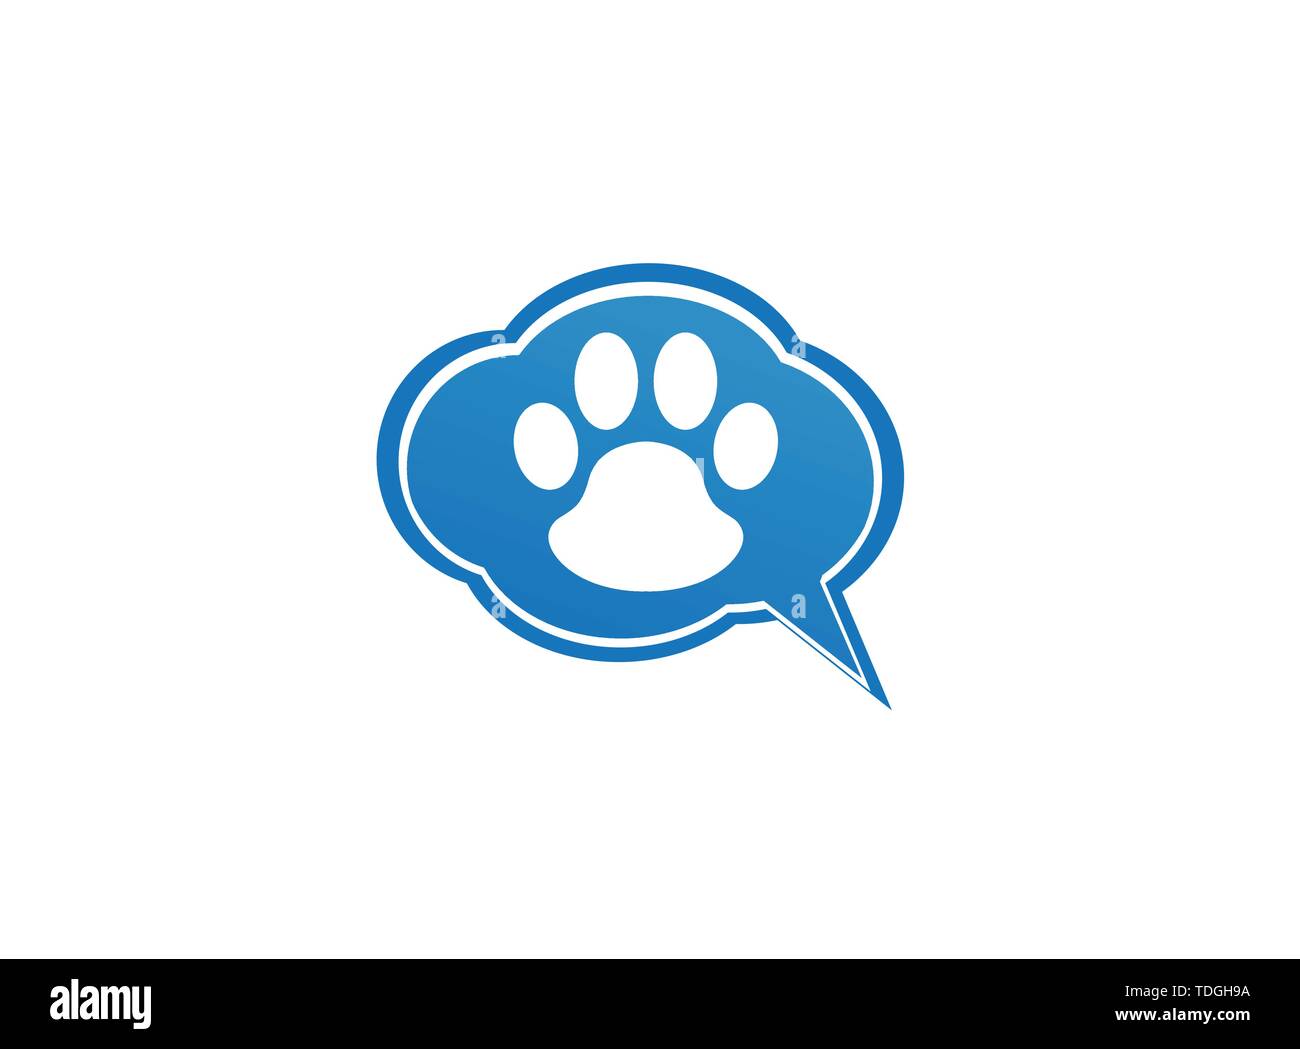 Paw inside an chat icon and footprint symbol logo design illustration in the chat shape Stock Vector